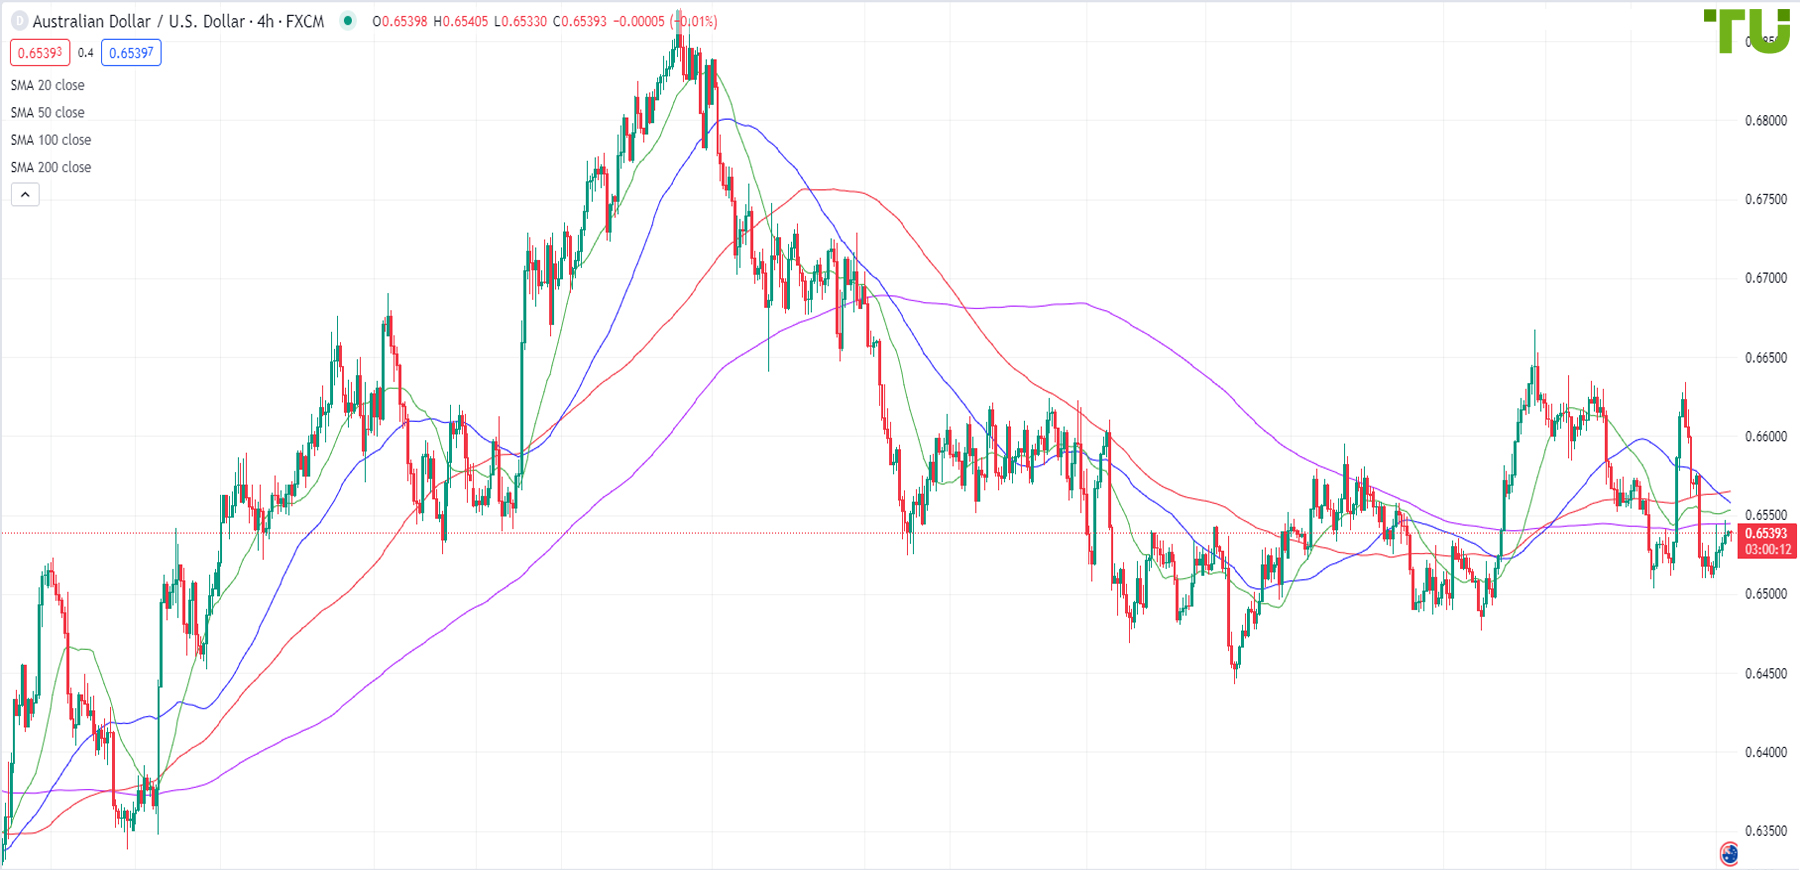 Aussie/dollar pulled back to 0.6550 resistance; downside risks persist